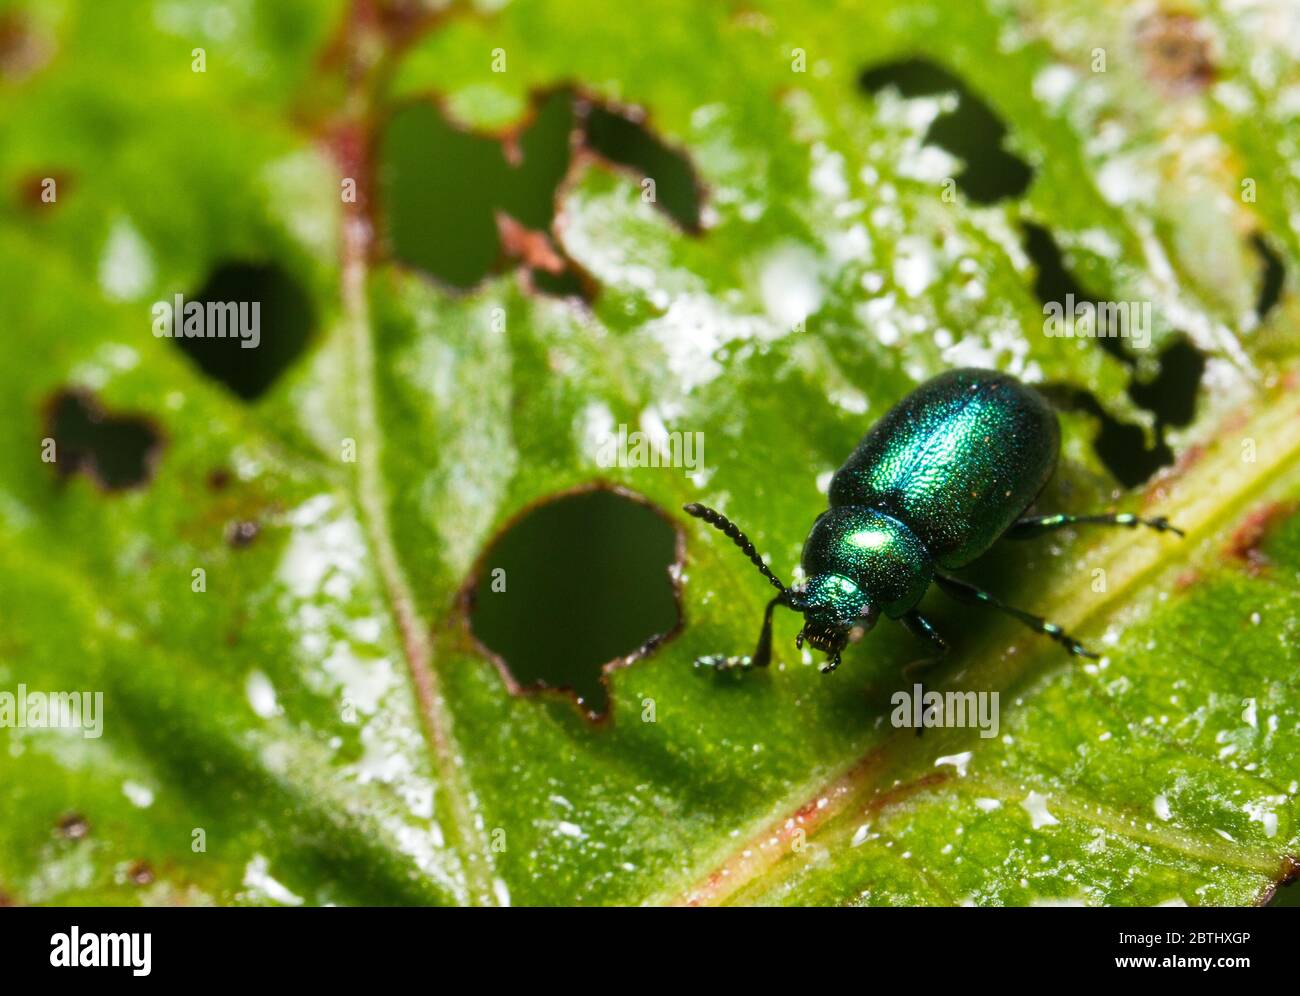 Insect of the beetle family Chrysomelidae, commonly known as leaf beetle. Chrysolina fastuosa, also known as the dead-nettle leaf beetle Stock Photo